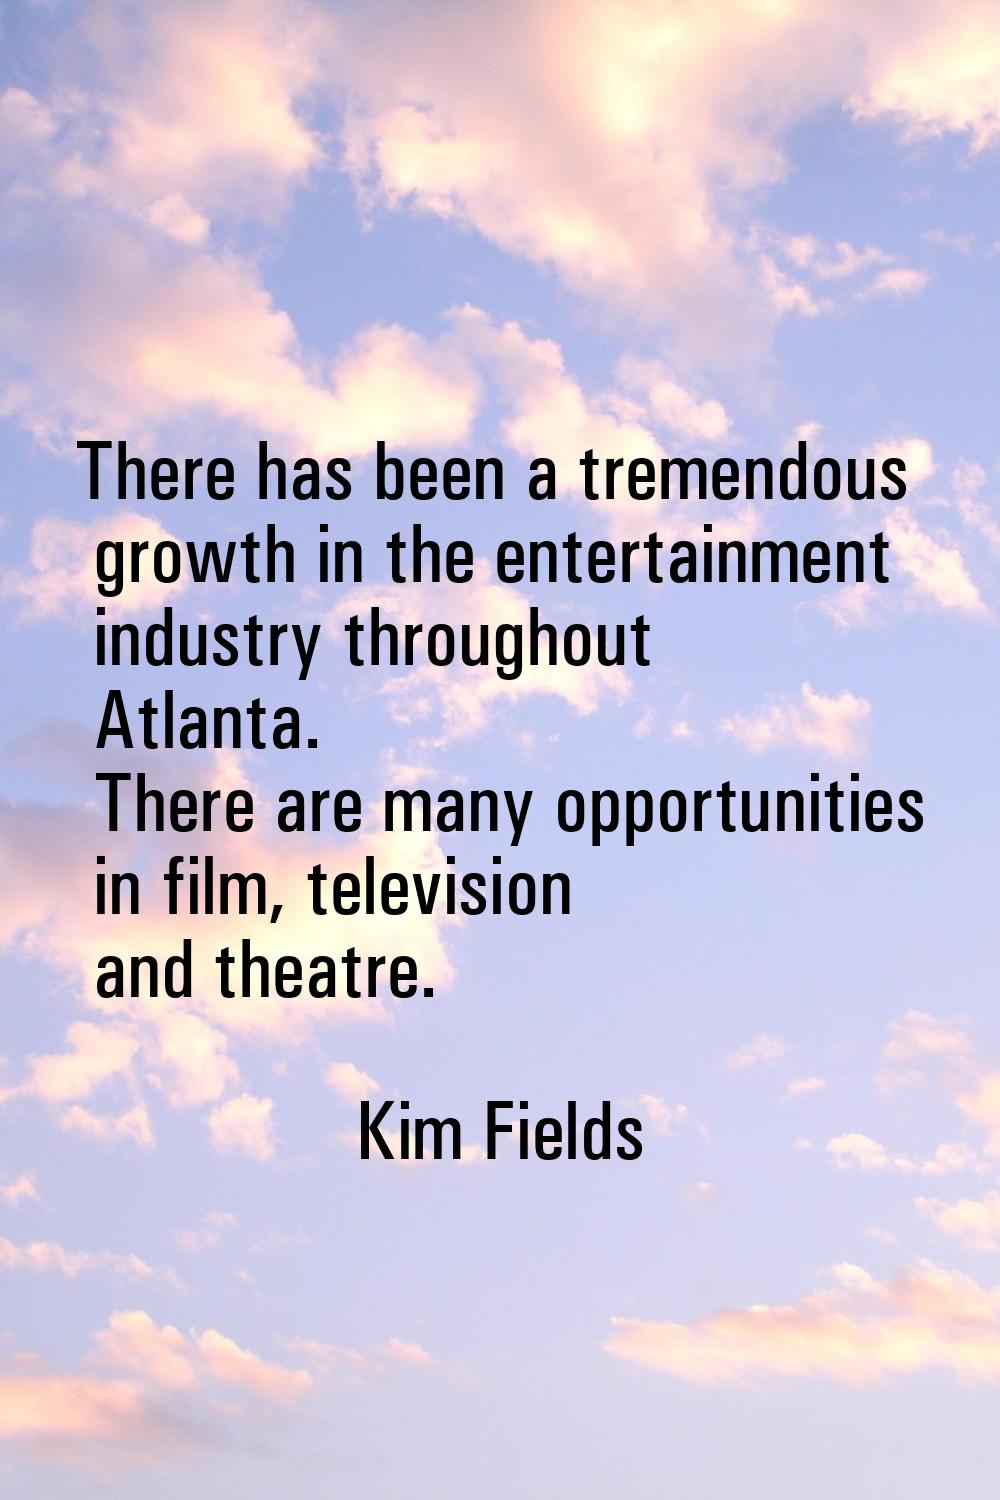 There has been a tremendous growth in the entertainment industry throughout Atlanta. There are many